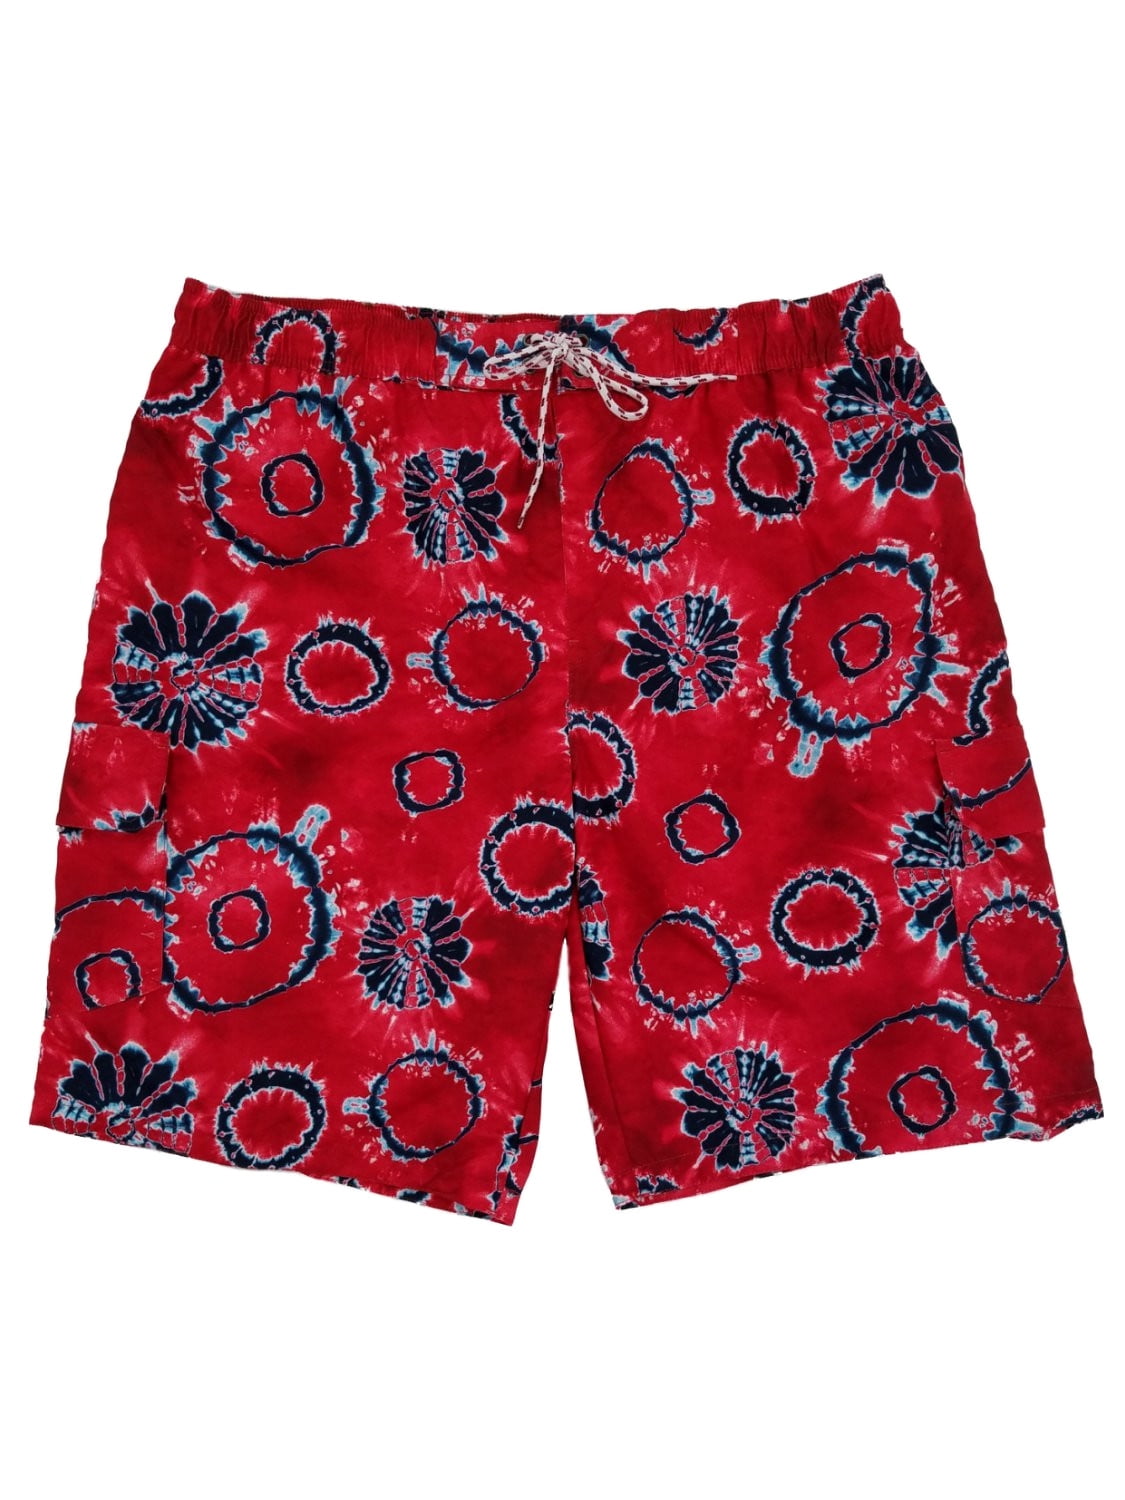 Mens Bathing Suit Peace and Love Color Lightweight Beach Boardshort for Men 